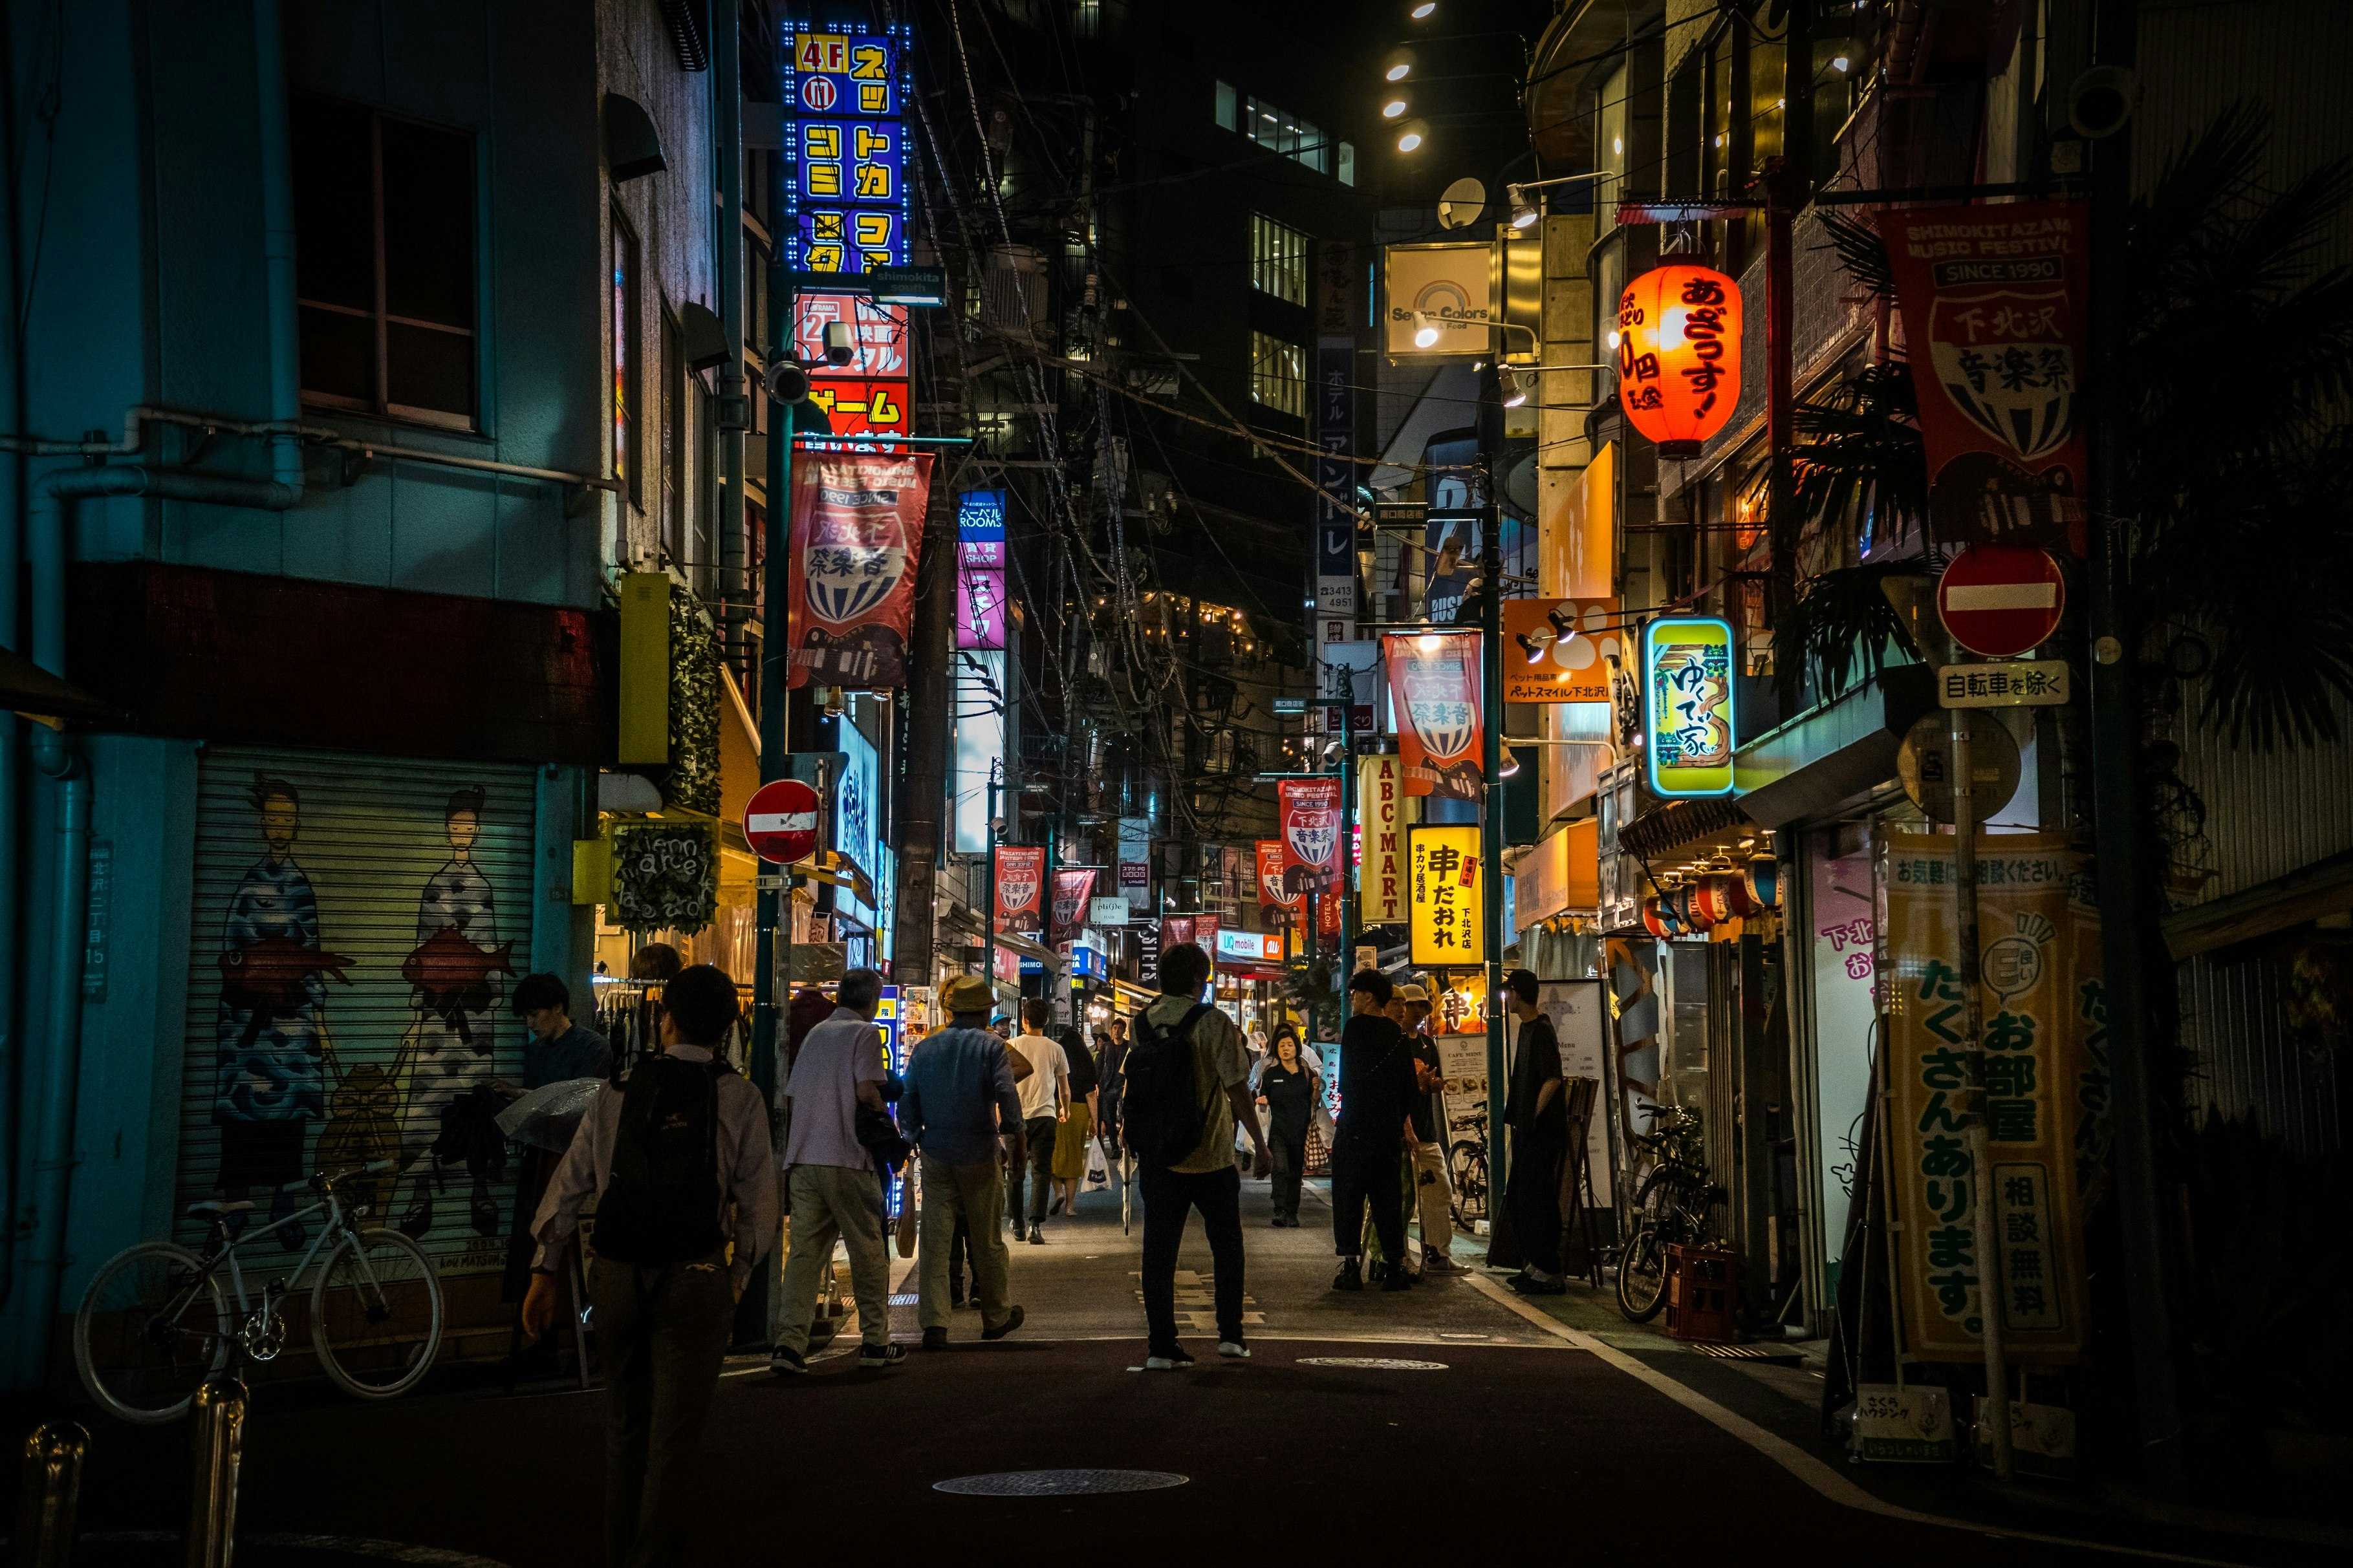 People in the street of Shimo-kitazawa district. It is evening and the various neon lights illuminate the scene.